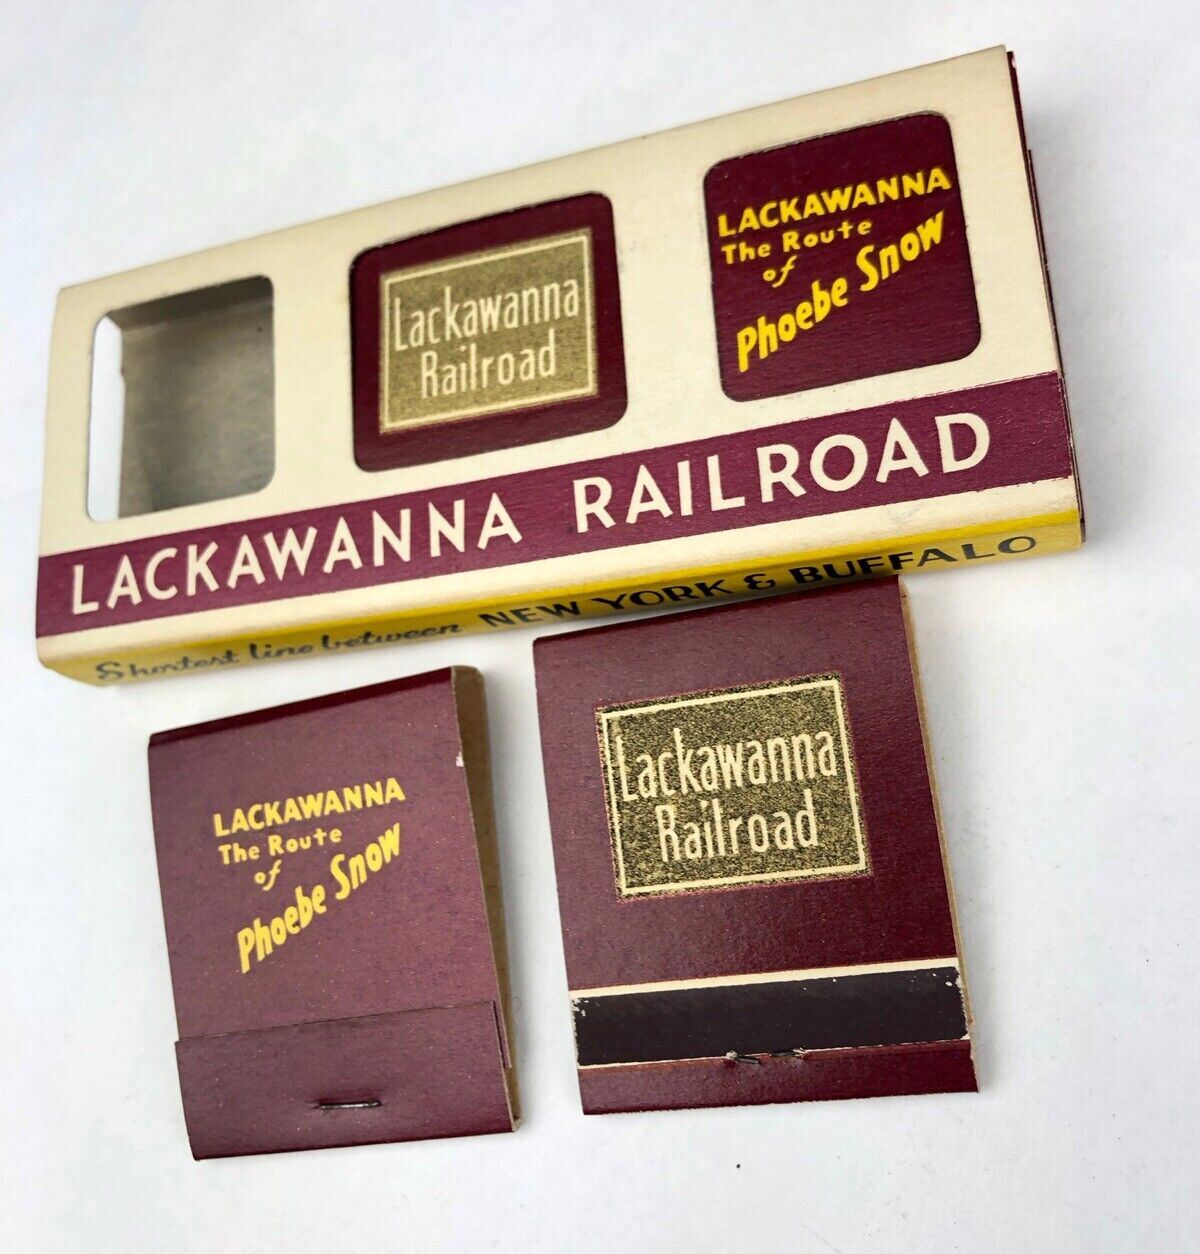 RARE Lackawanna Railroad Route of Phoebe Snow VINTAGE 6 MATCHBOOKS In Sleeve NOS